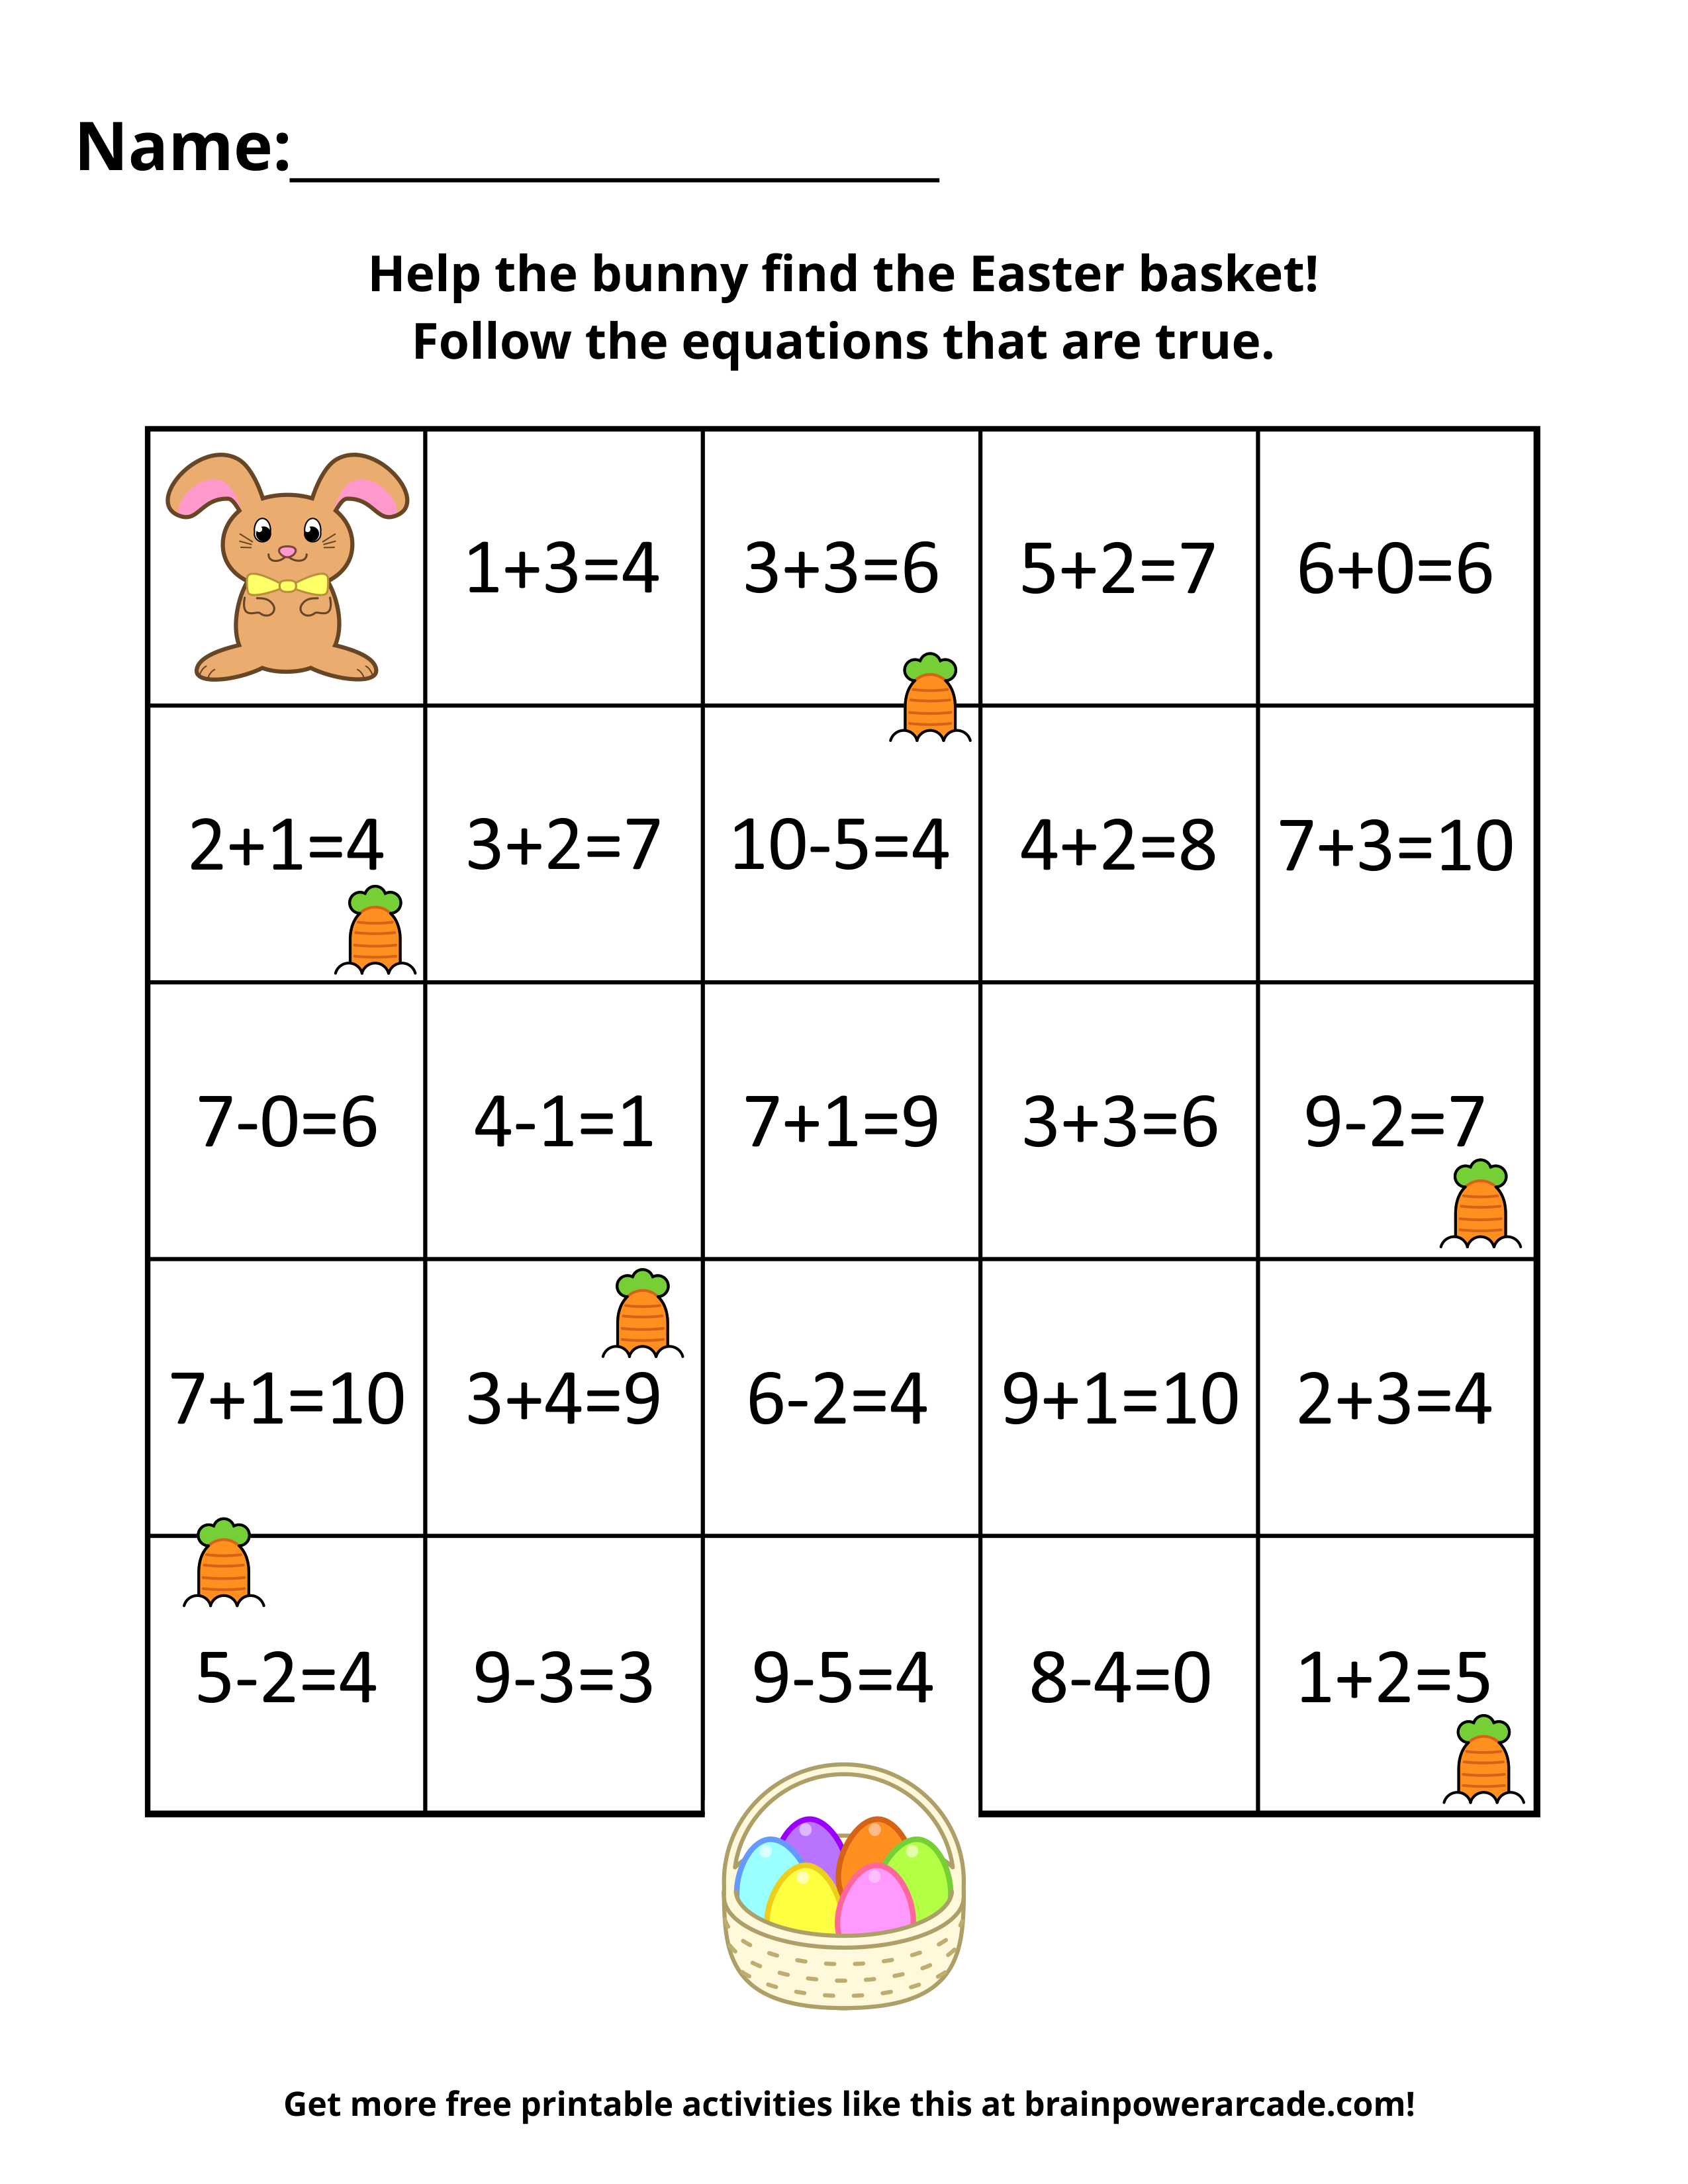 Follow Equations That Are True (Single Digit Addition/Subtraction)